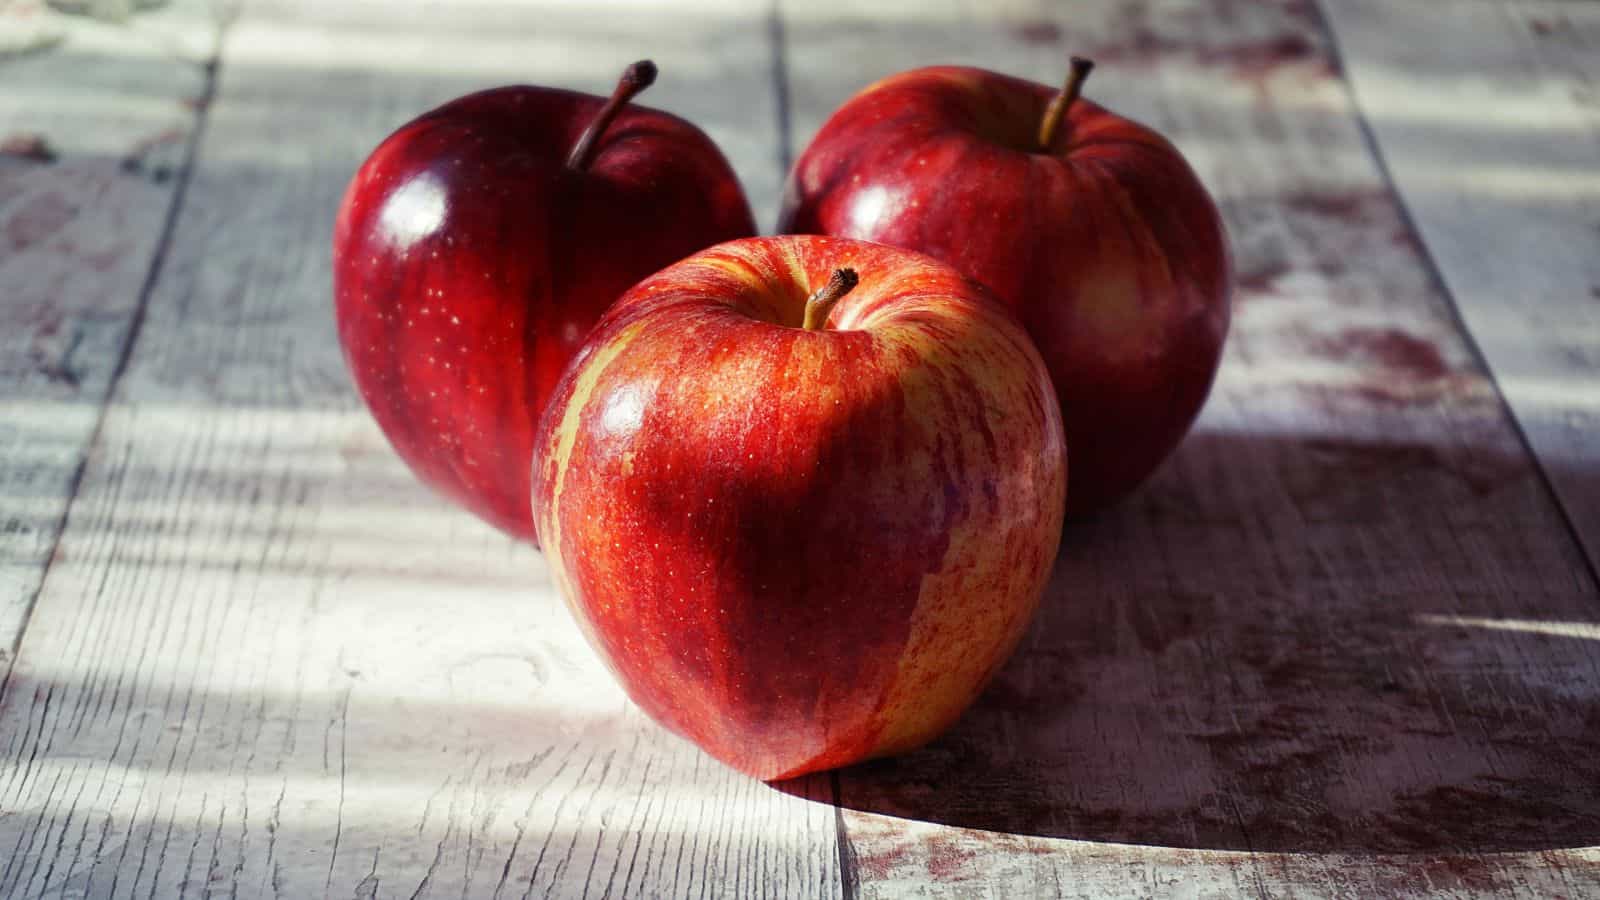 Three Red Apples on Wooden Surface.